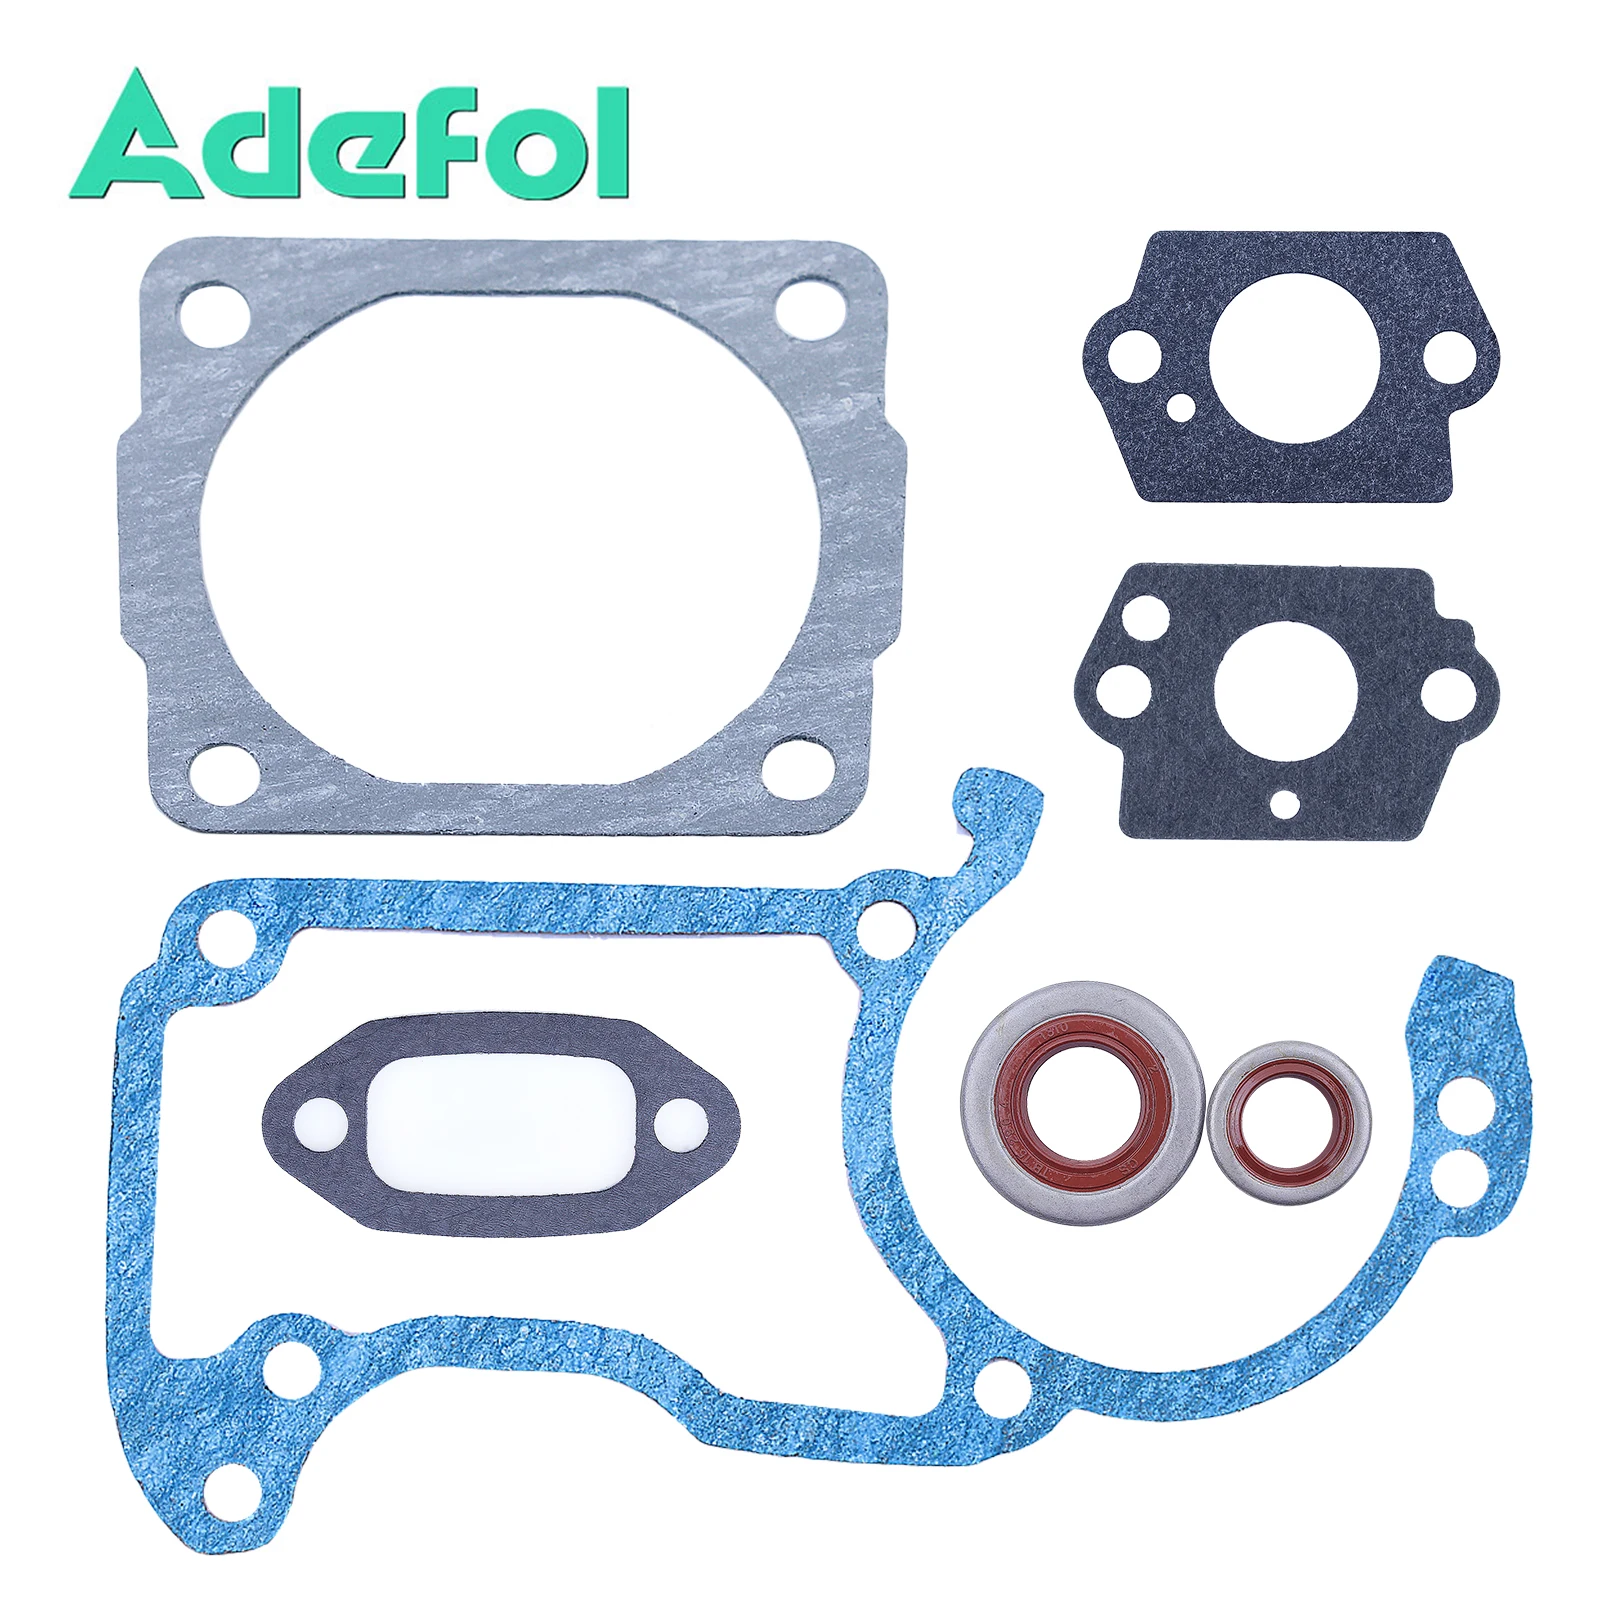 Gasket Set with Oil Seal For Stihl MS240 MS260 024 026 Chainsaws Parts Replace 1121 029 0500